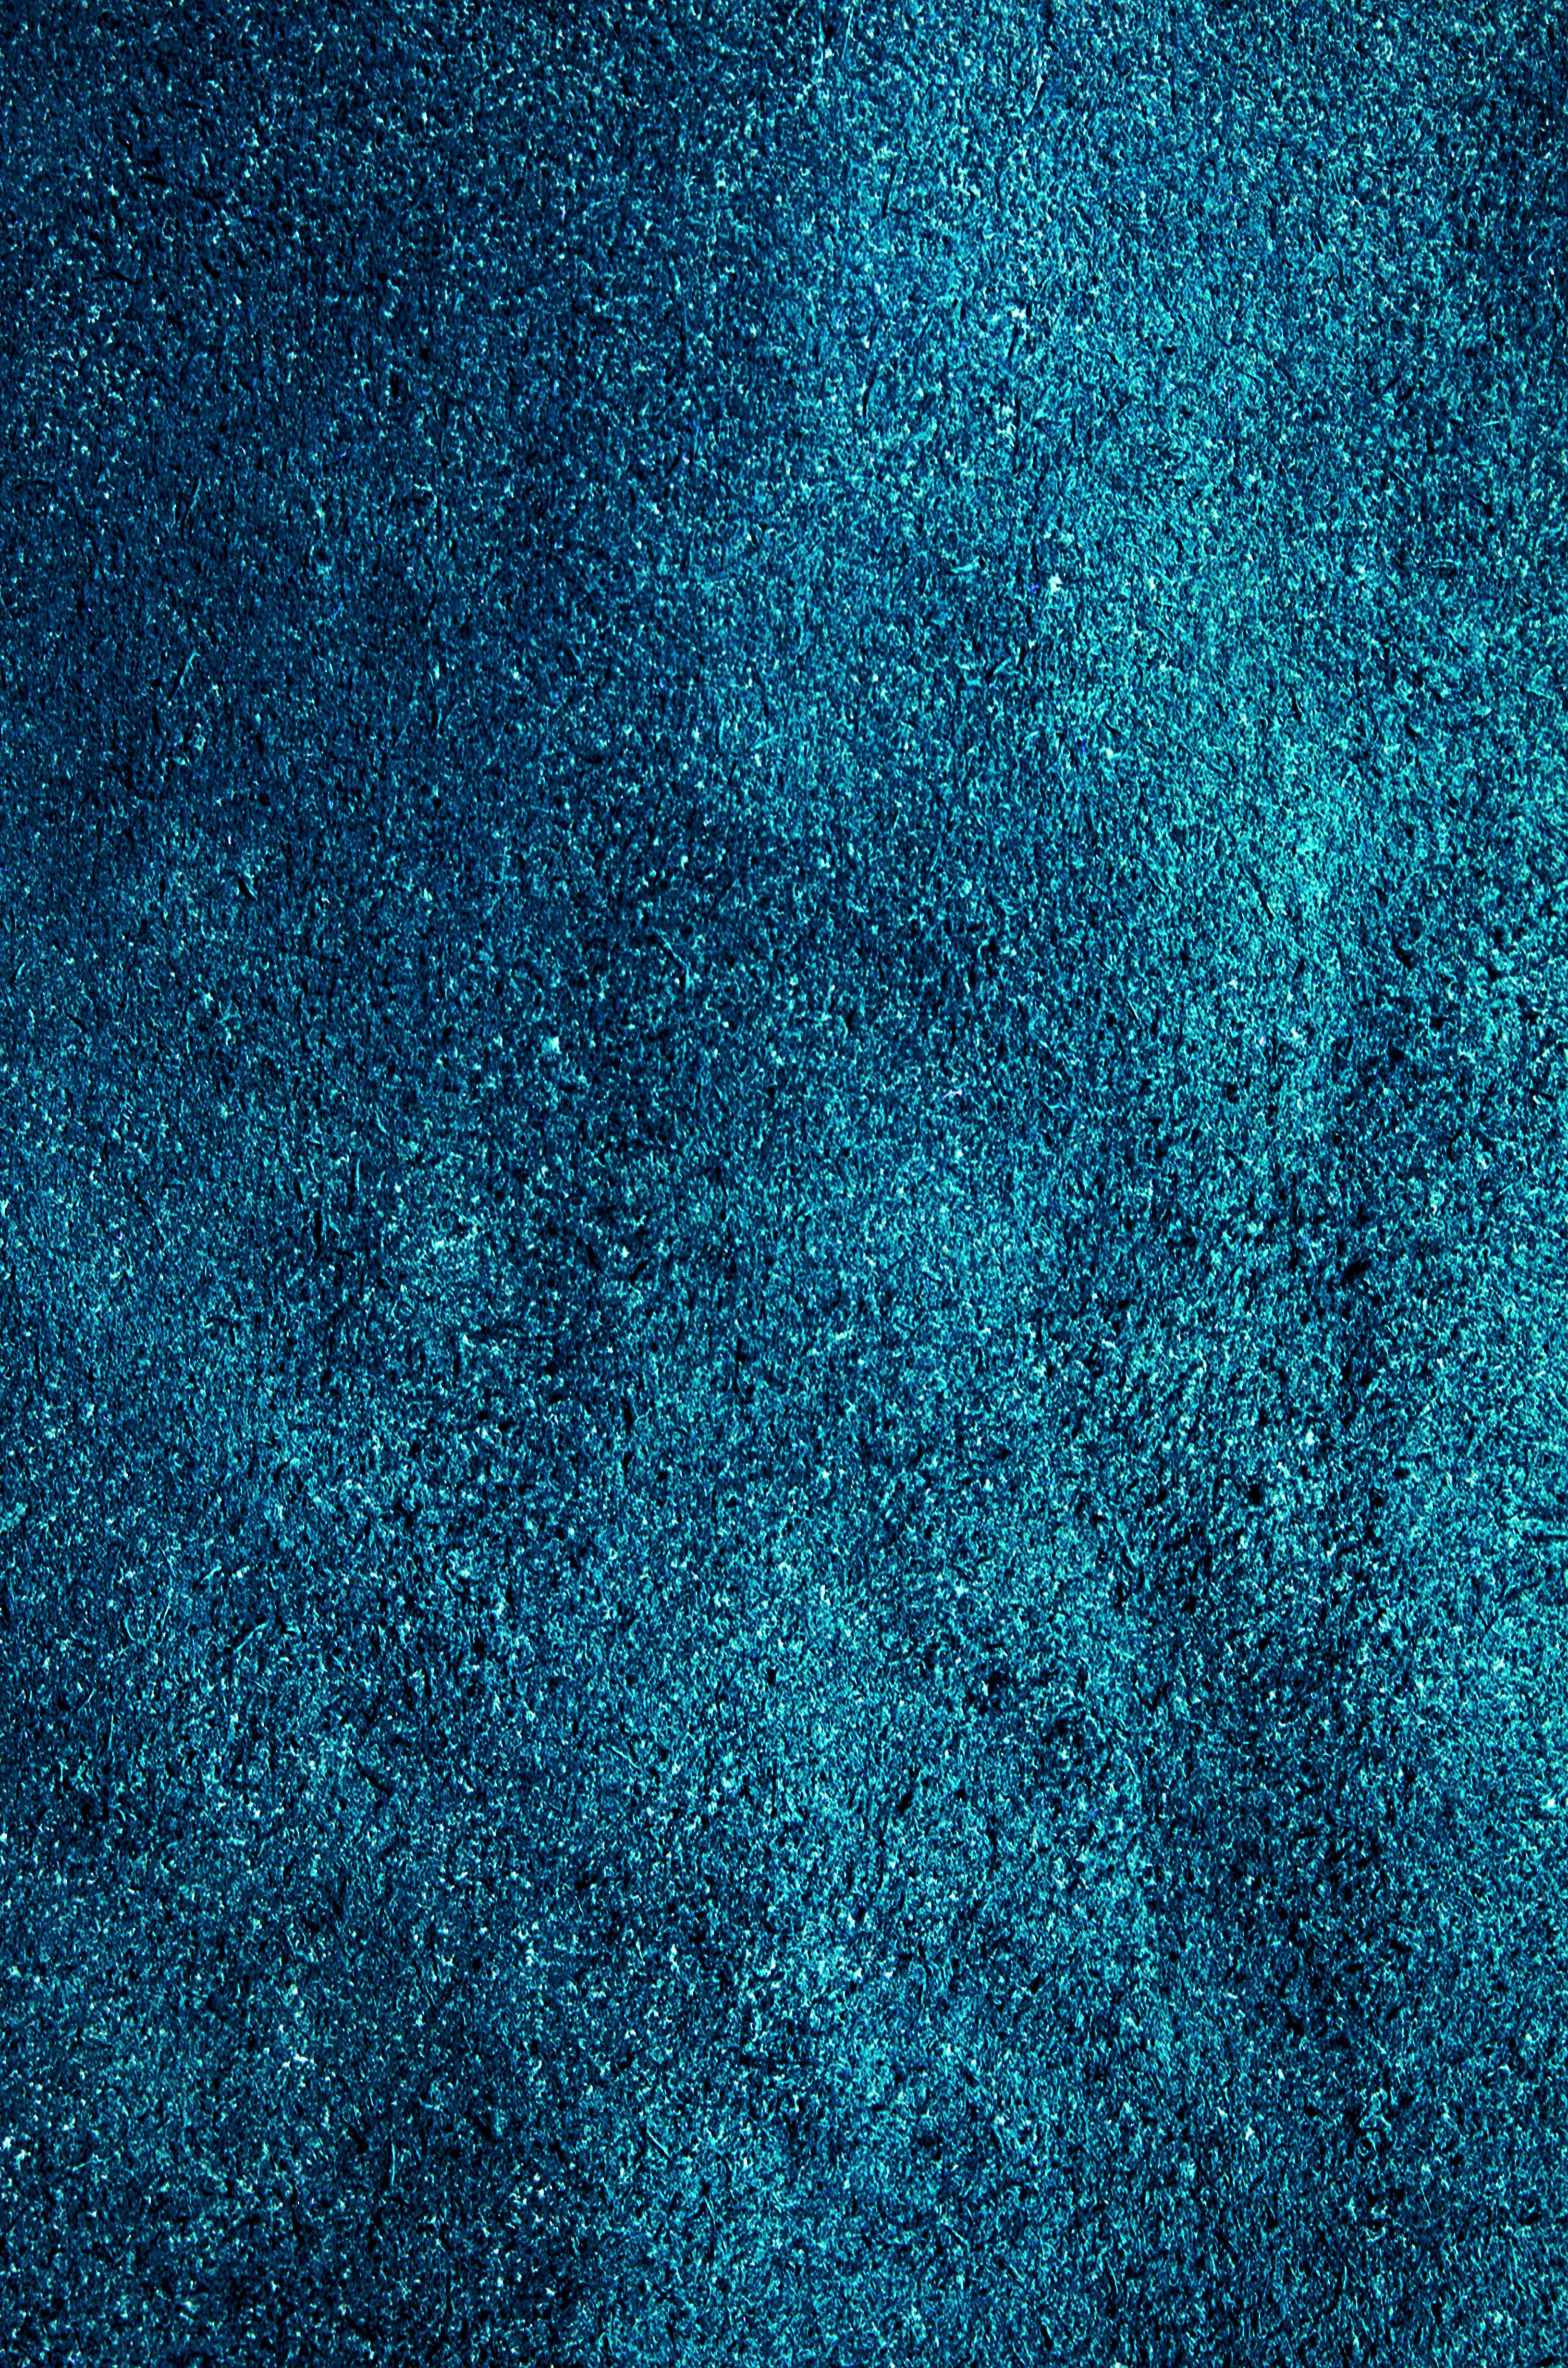 Photo Blue Grunge Background Abstract Oldest Emerald